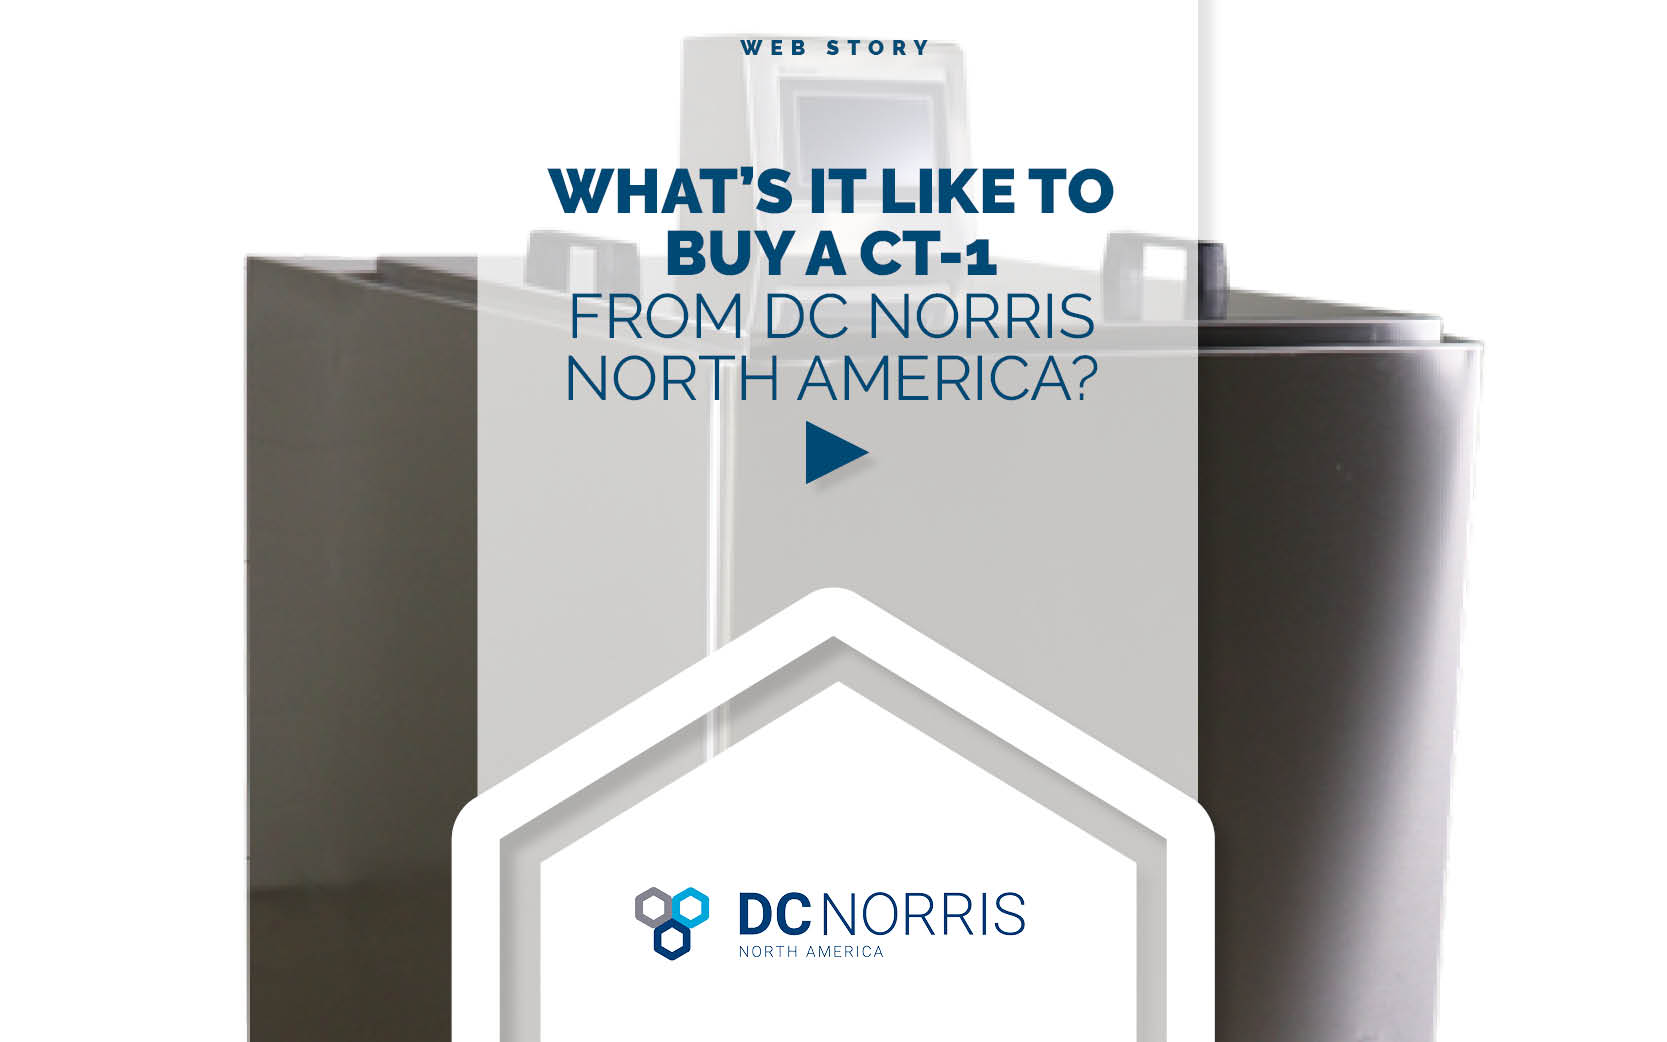 The headline reads: web story, What's It Like to Buy a CT-1 From DC Norris North America? Behind the headline is an image of the CT-1 on a white background